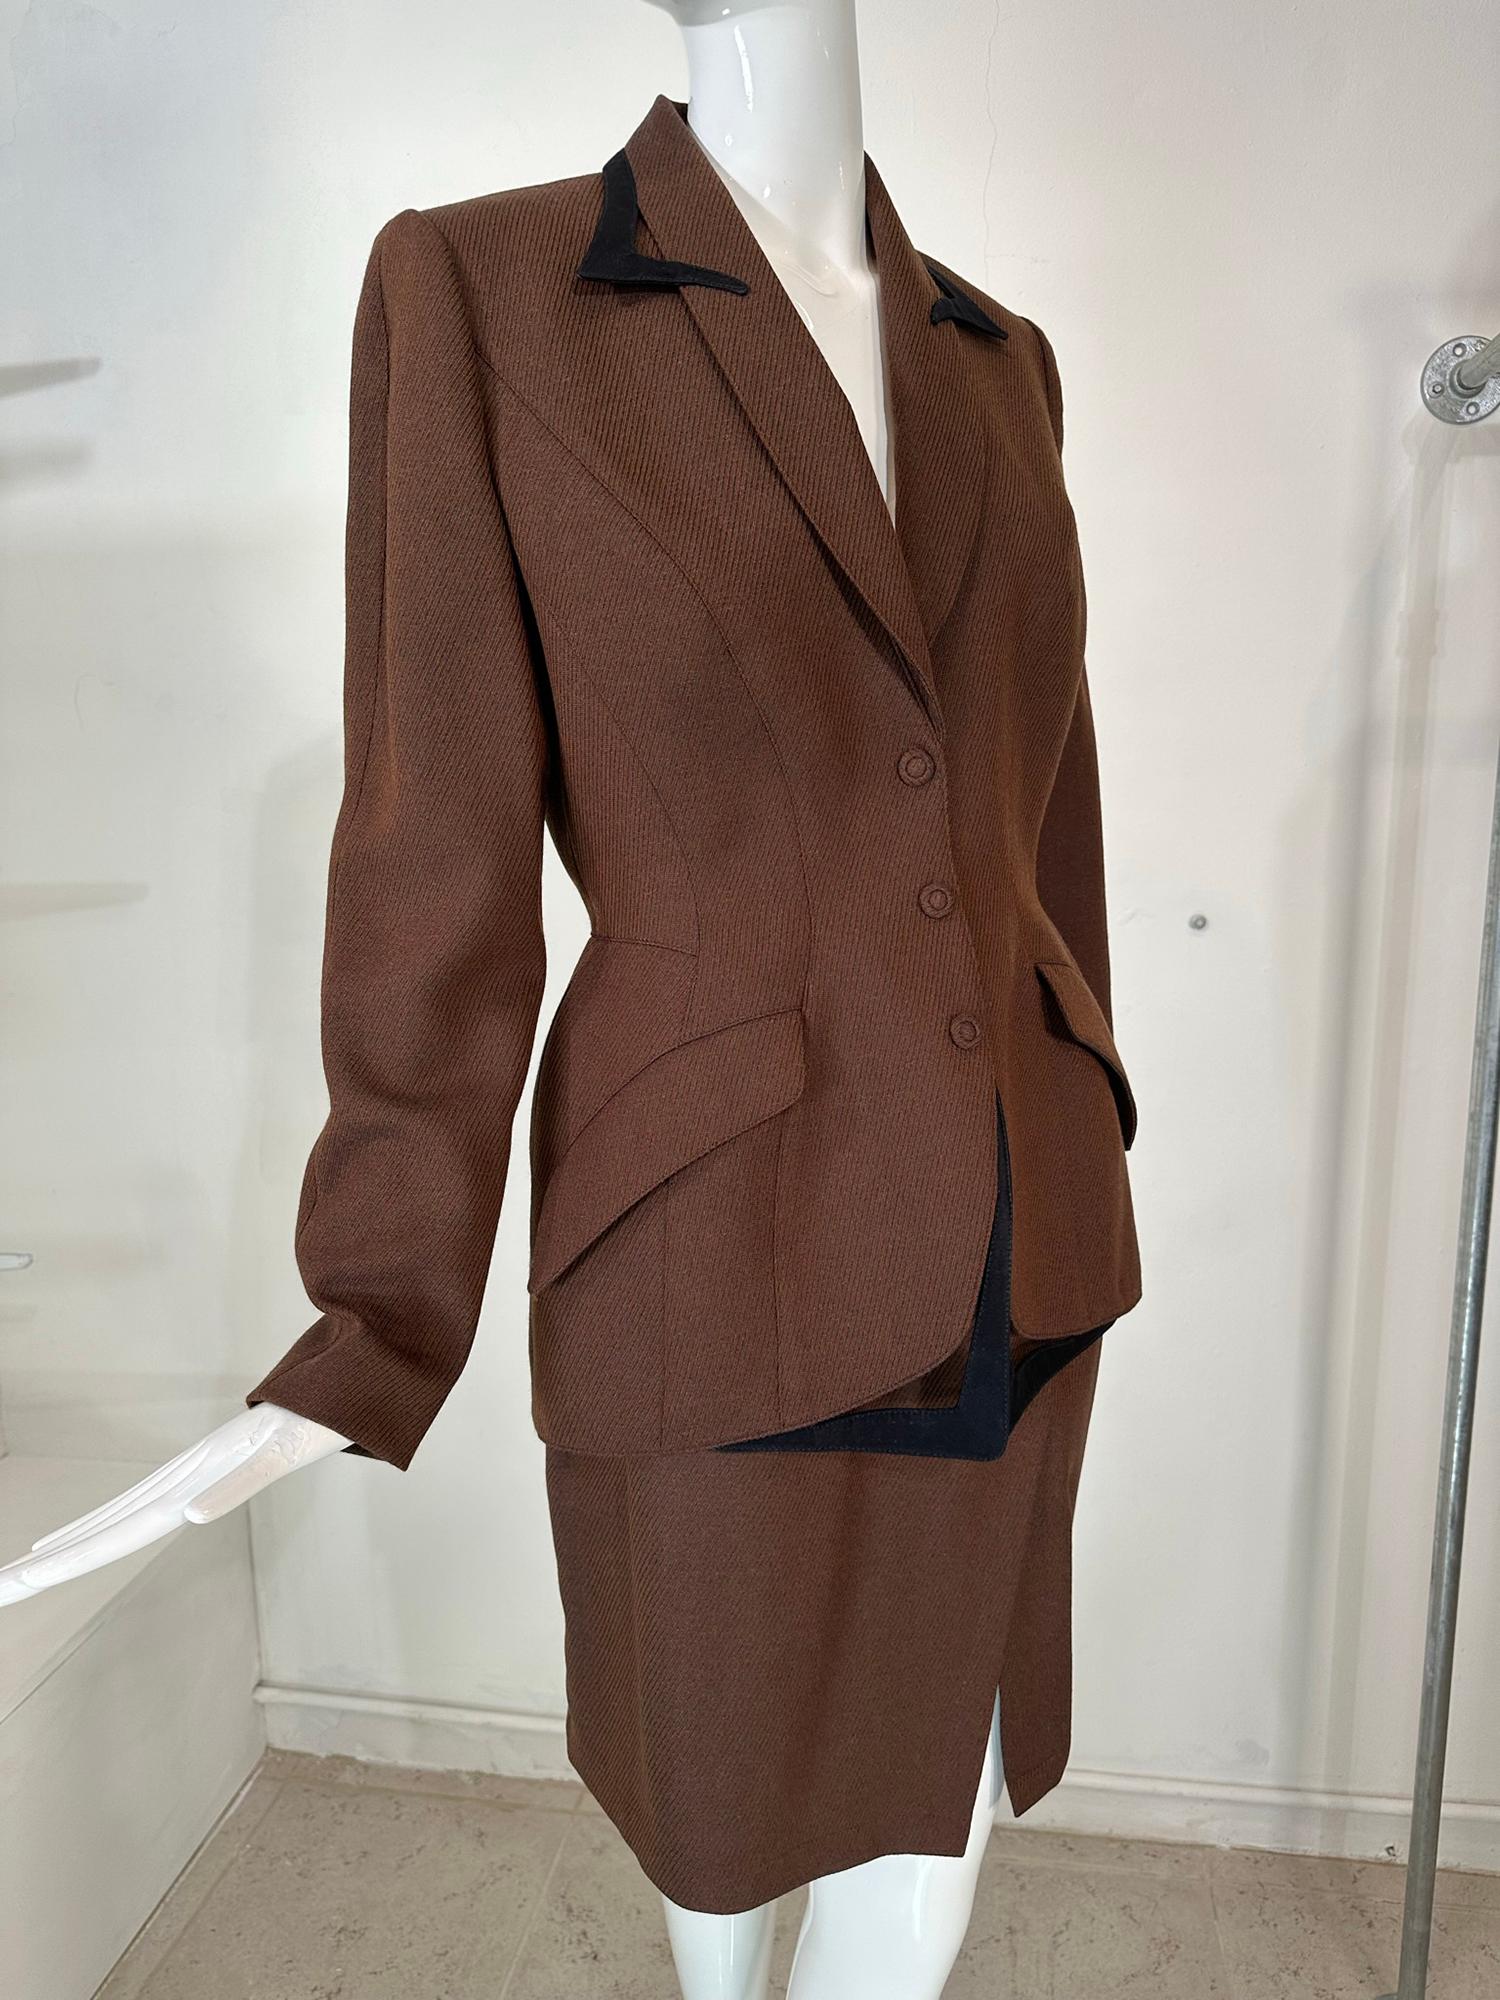 Thierry Mugler brown wool twill suit from the 1980s. Princess seam, single breasted jacket is fitted through the waist and hugs the hips. This beautifully tailored jacket has exaggerated angled hip flap pockets & closes at the front with covered